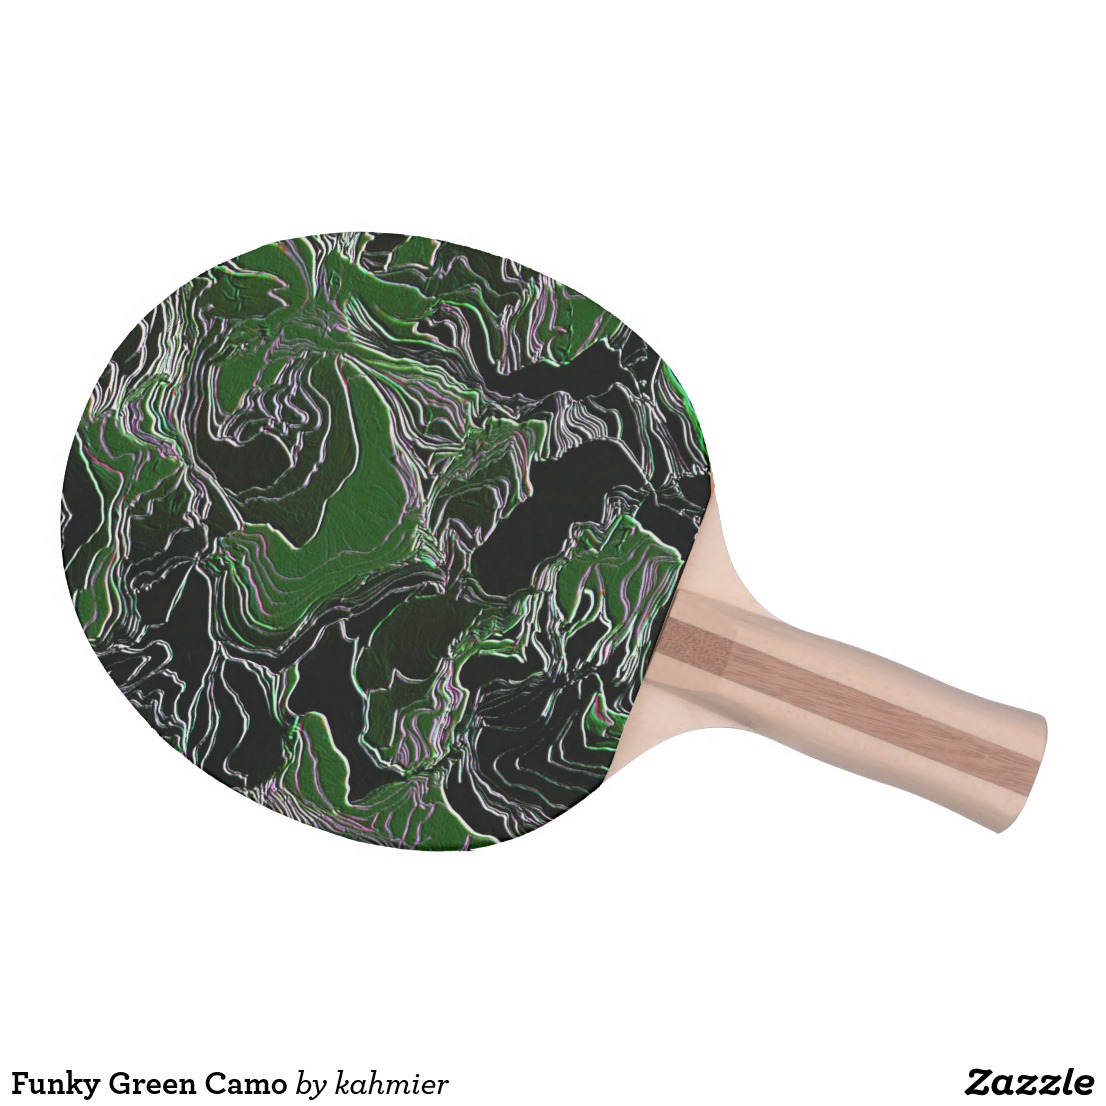 Funky Green Camo Ping Pong Paddle